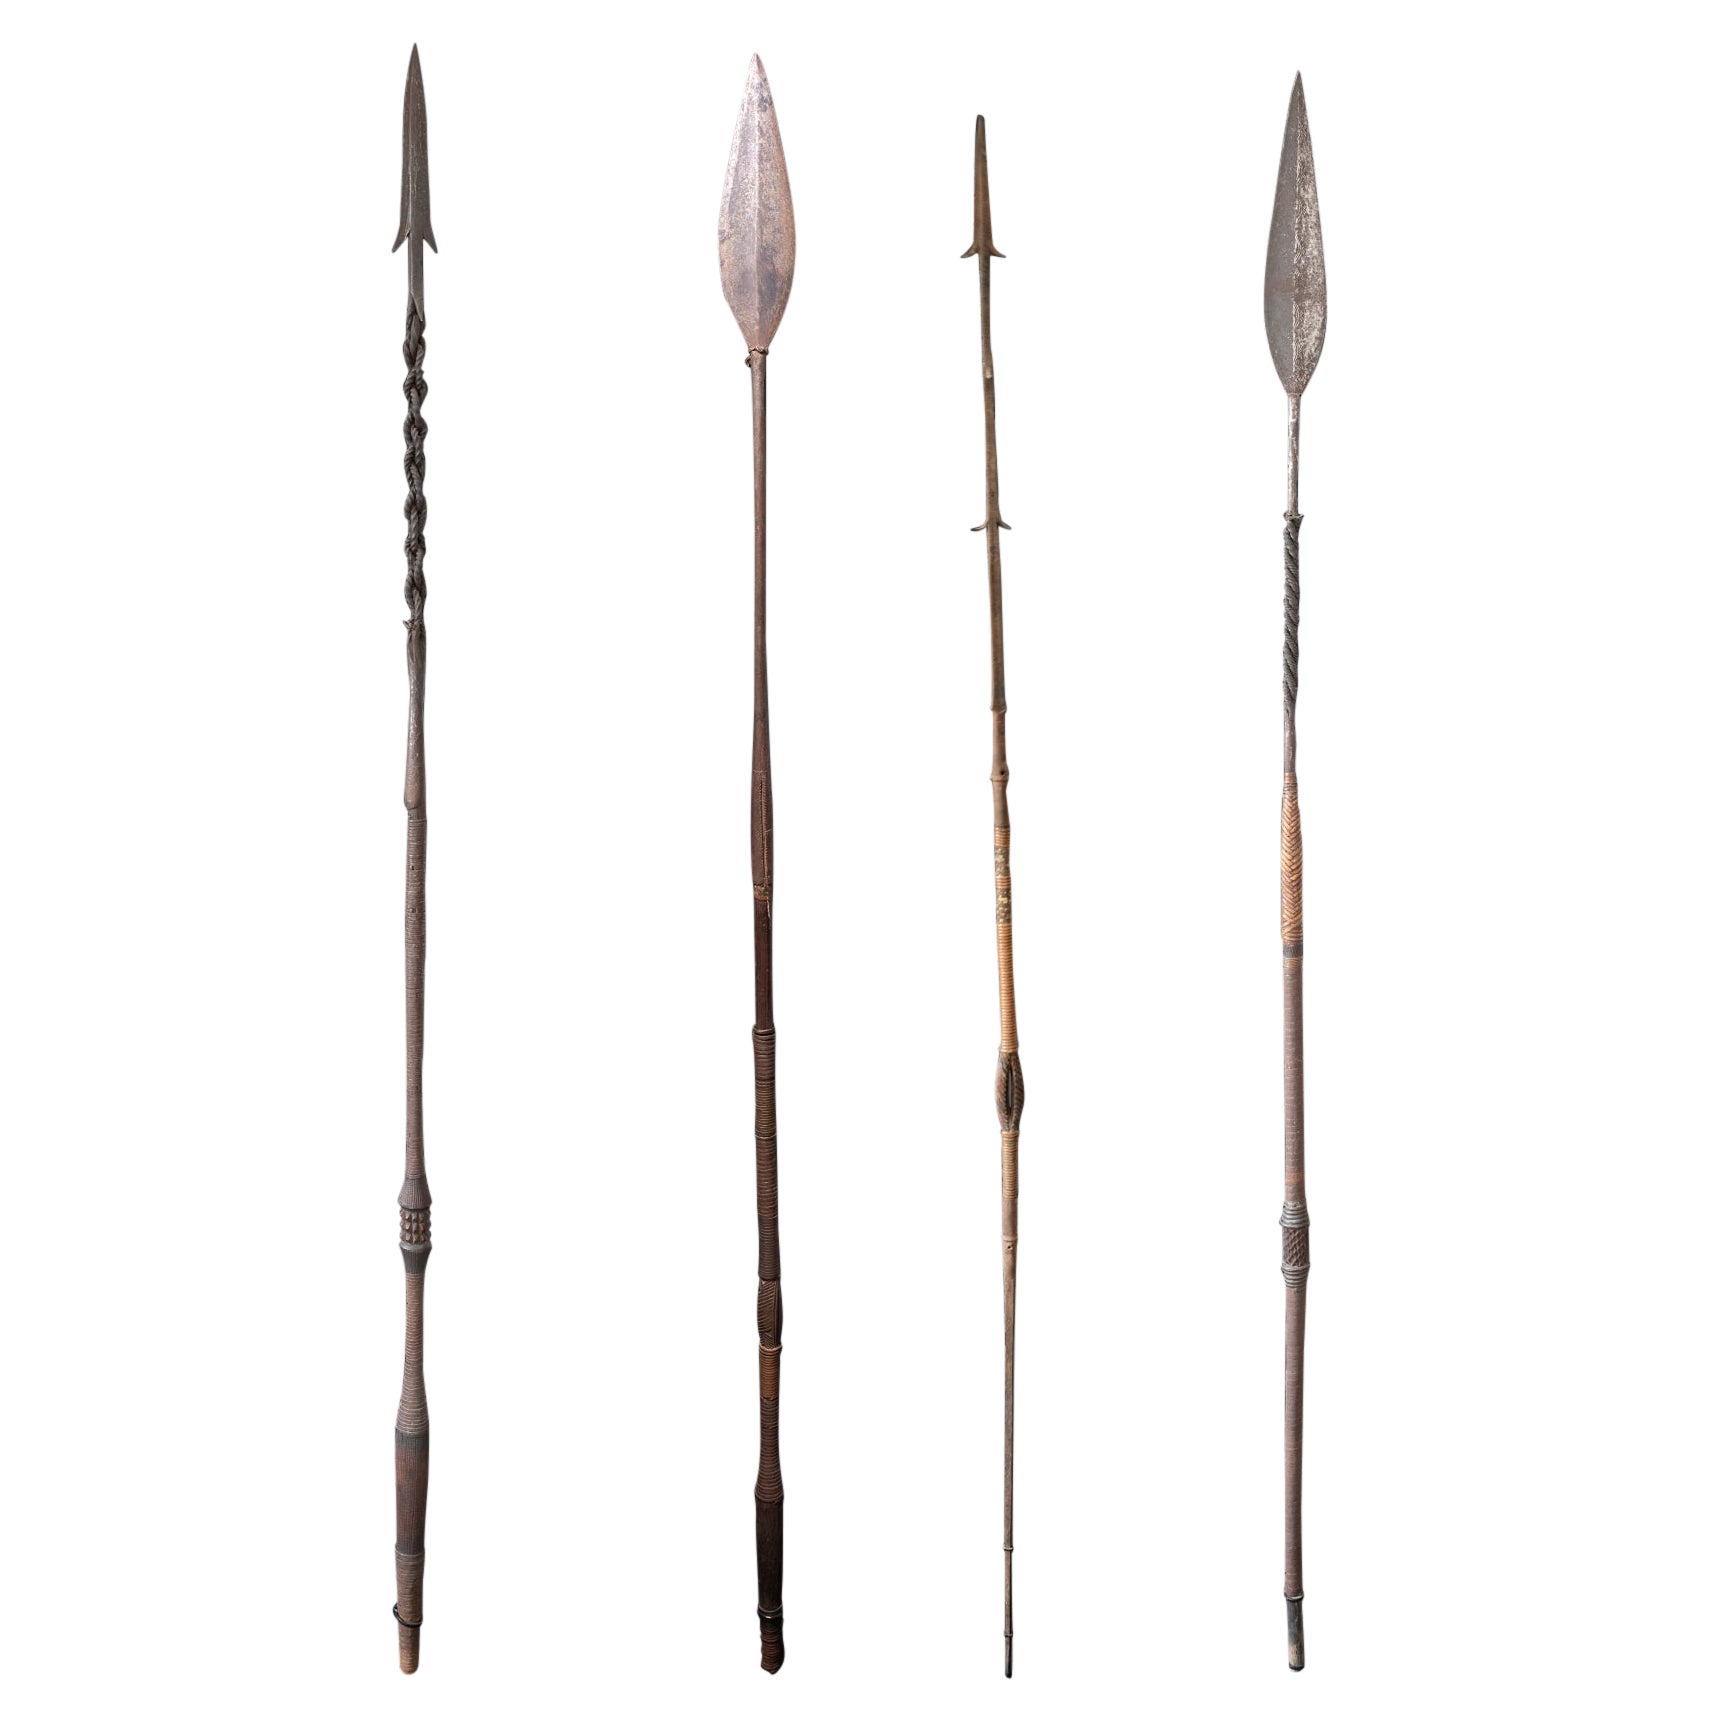 Set of Four Forged African Barbed Harpoon Spears from Kongo